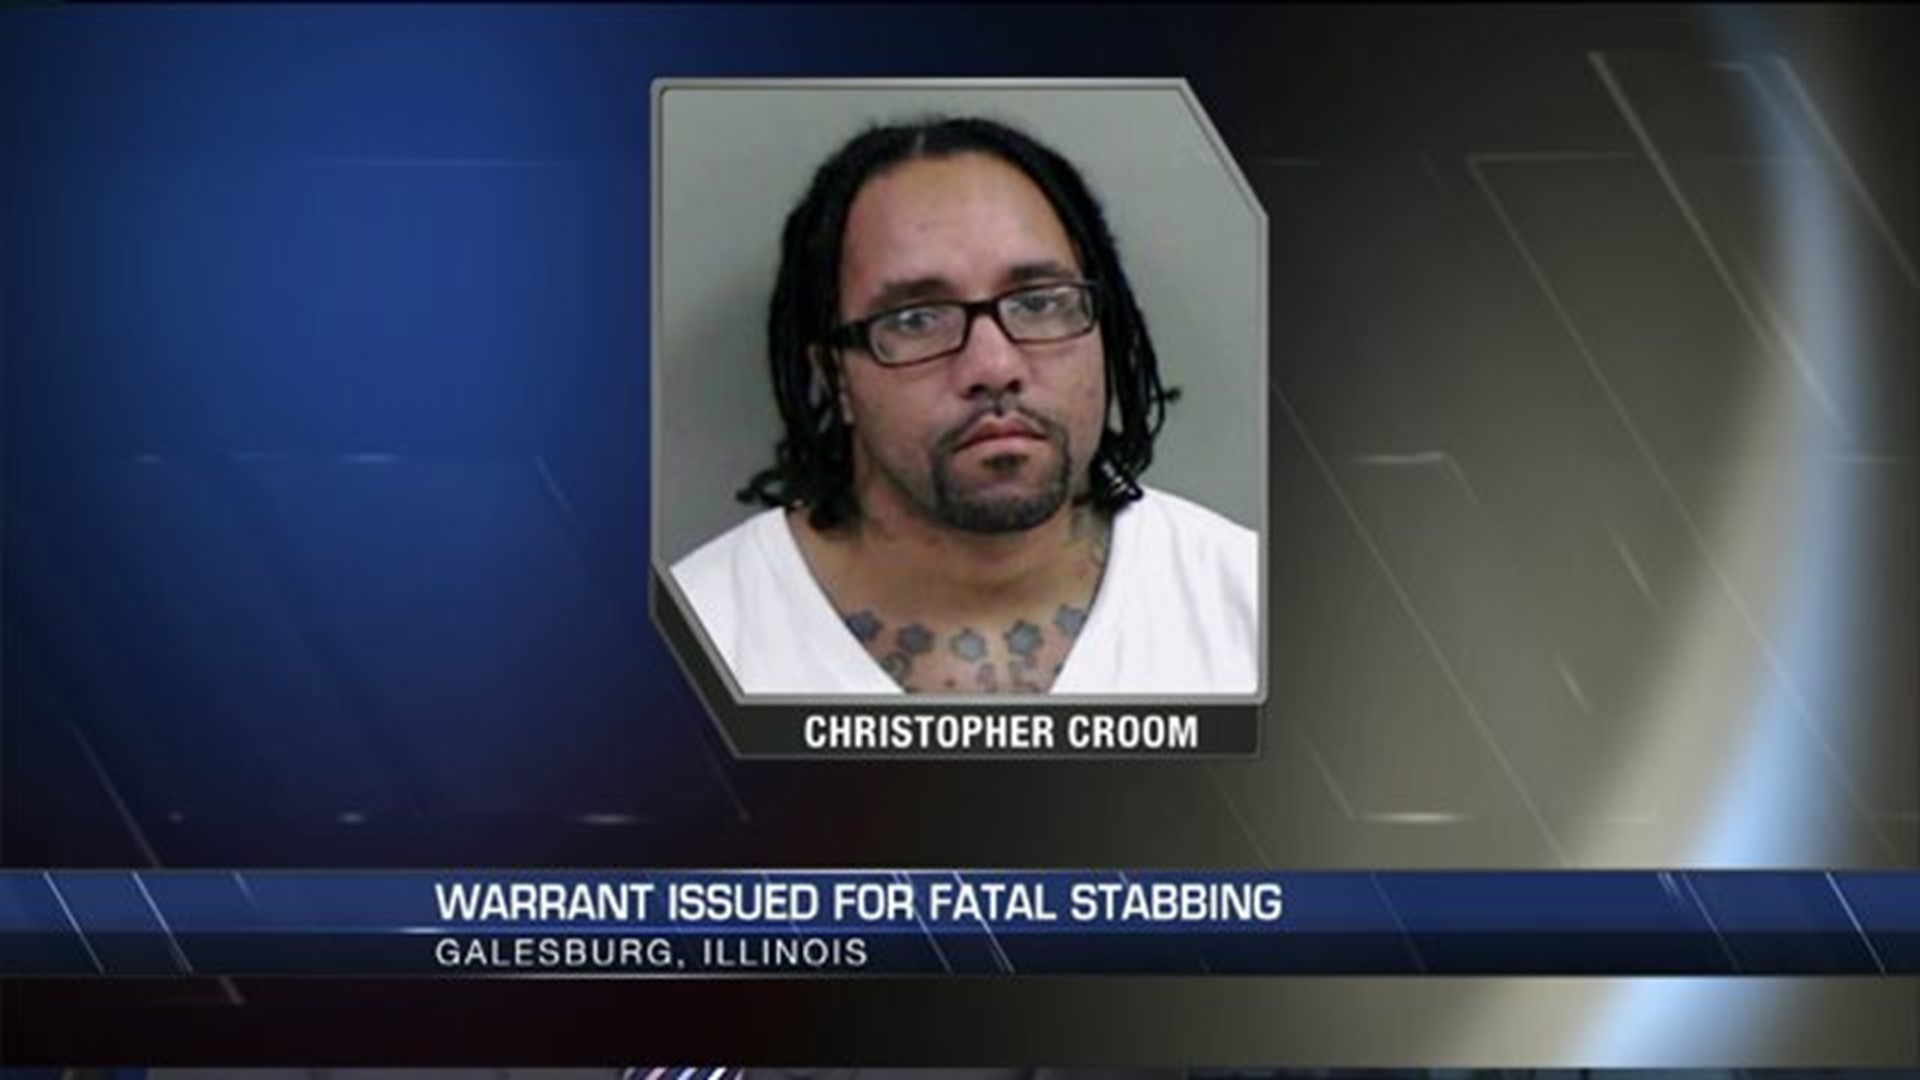 Man wanted for fatal stabbing